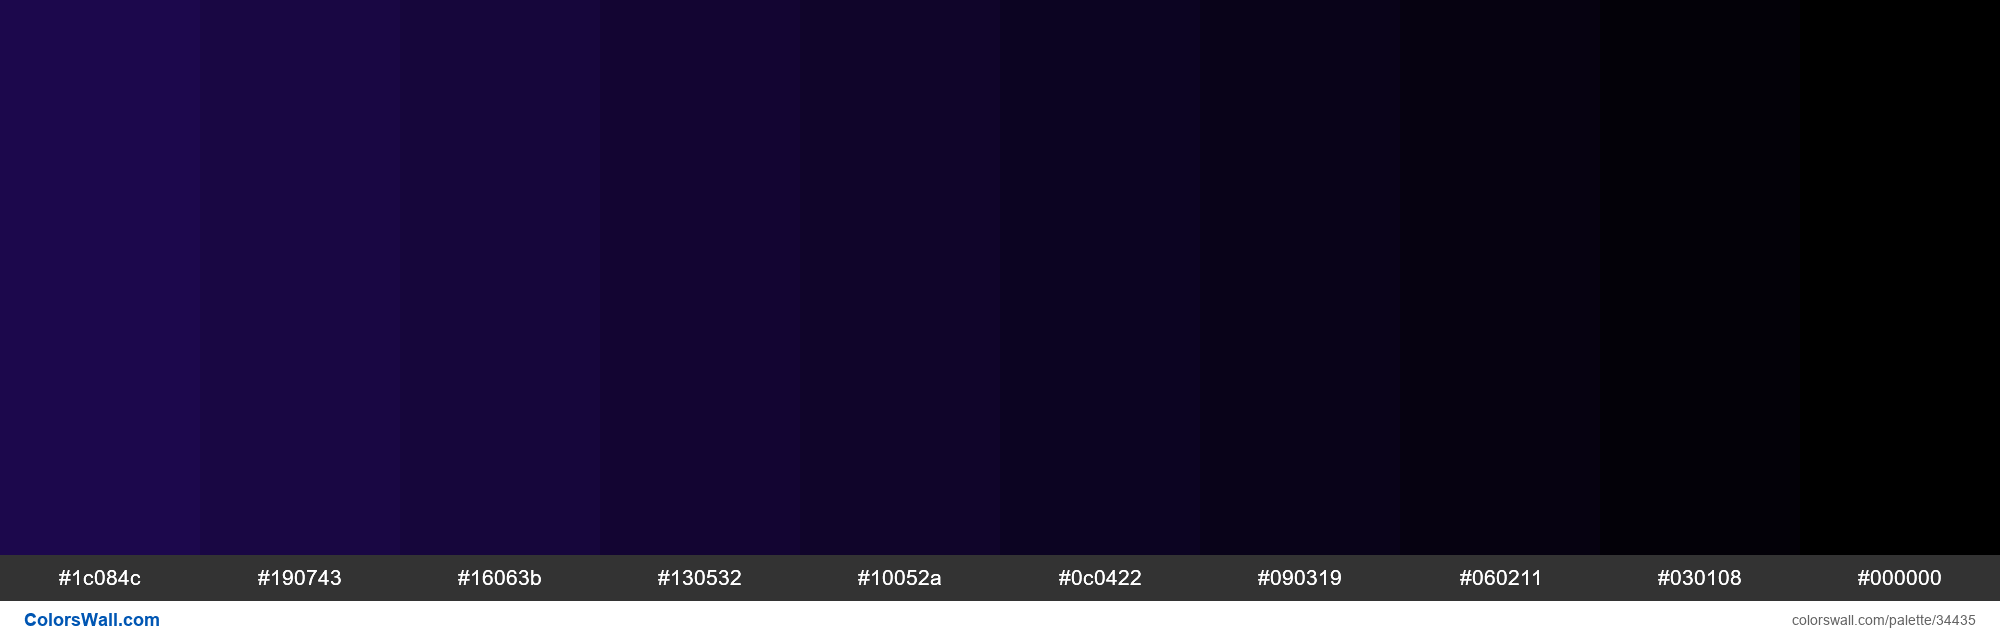 Shades XKCD Color dark indigo #1f0954 hex colors palette - ColorsWall